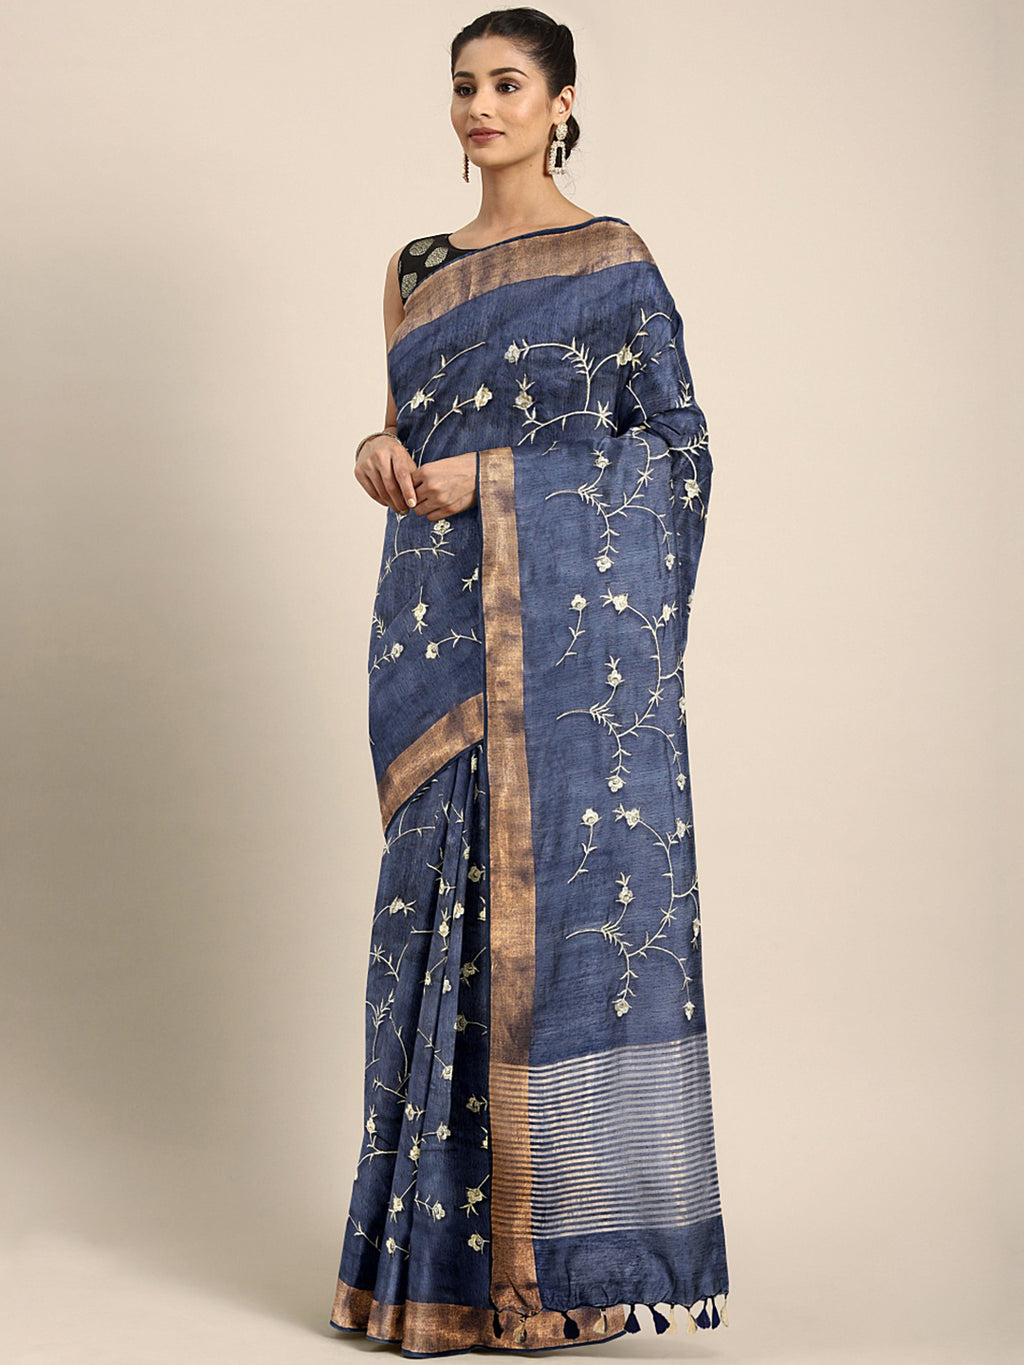 Kalakari India Kota Silk Embroidered Saree With Blouse ALBGSA0157-Saree-Kalakari India-ALBGSA0157-Geographical Indication, Hand Crafted, Heritage Prints, Linen, Natural Dyes, Pure Cotton, Sarees, Sustainable Fabrics, Woven-[Linen,Ethnic,wear,Fashionista,Handloom,Handicraft,Indigo,blockprint,block,print,Cotton,Chanderi,Blue, latest,classy,party,bollywood,trendy,summer,style,traditional,formal,elegant,unique,style,hand,block,print, dabu,booti,gift,present,glamorous,affordable,collectible,Sari,Sare